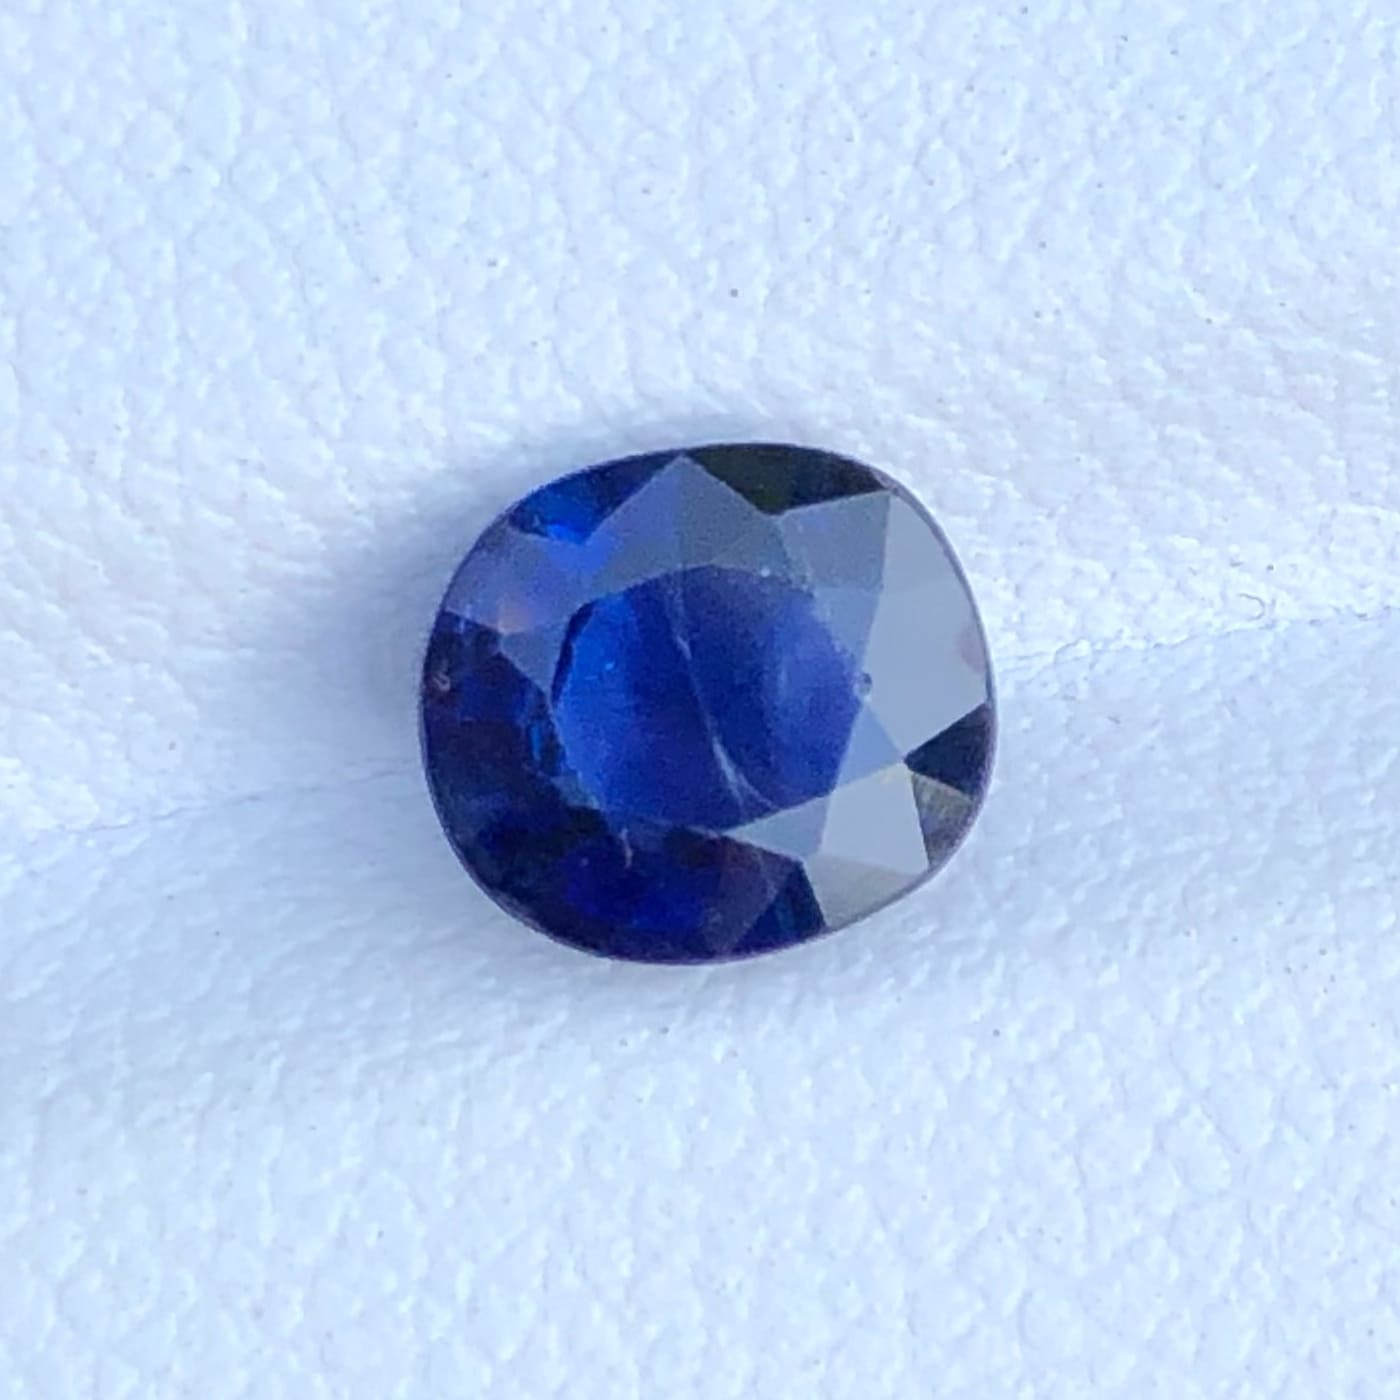 Buy 1.50 Carats Faceted Tealish Blue Sapphire